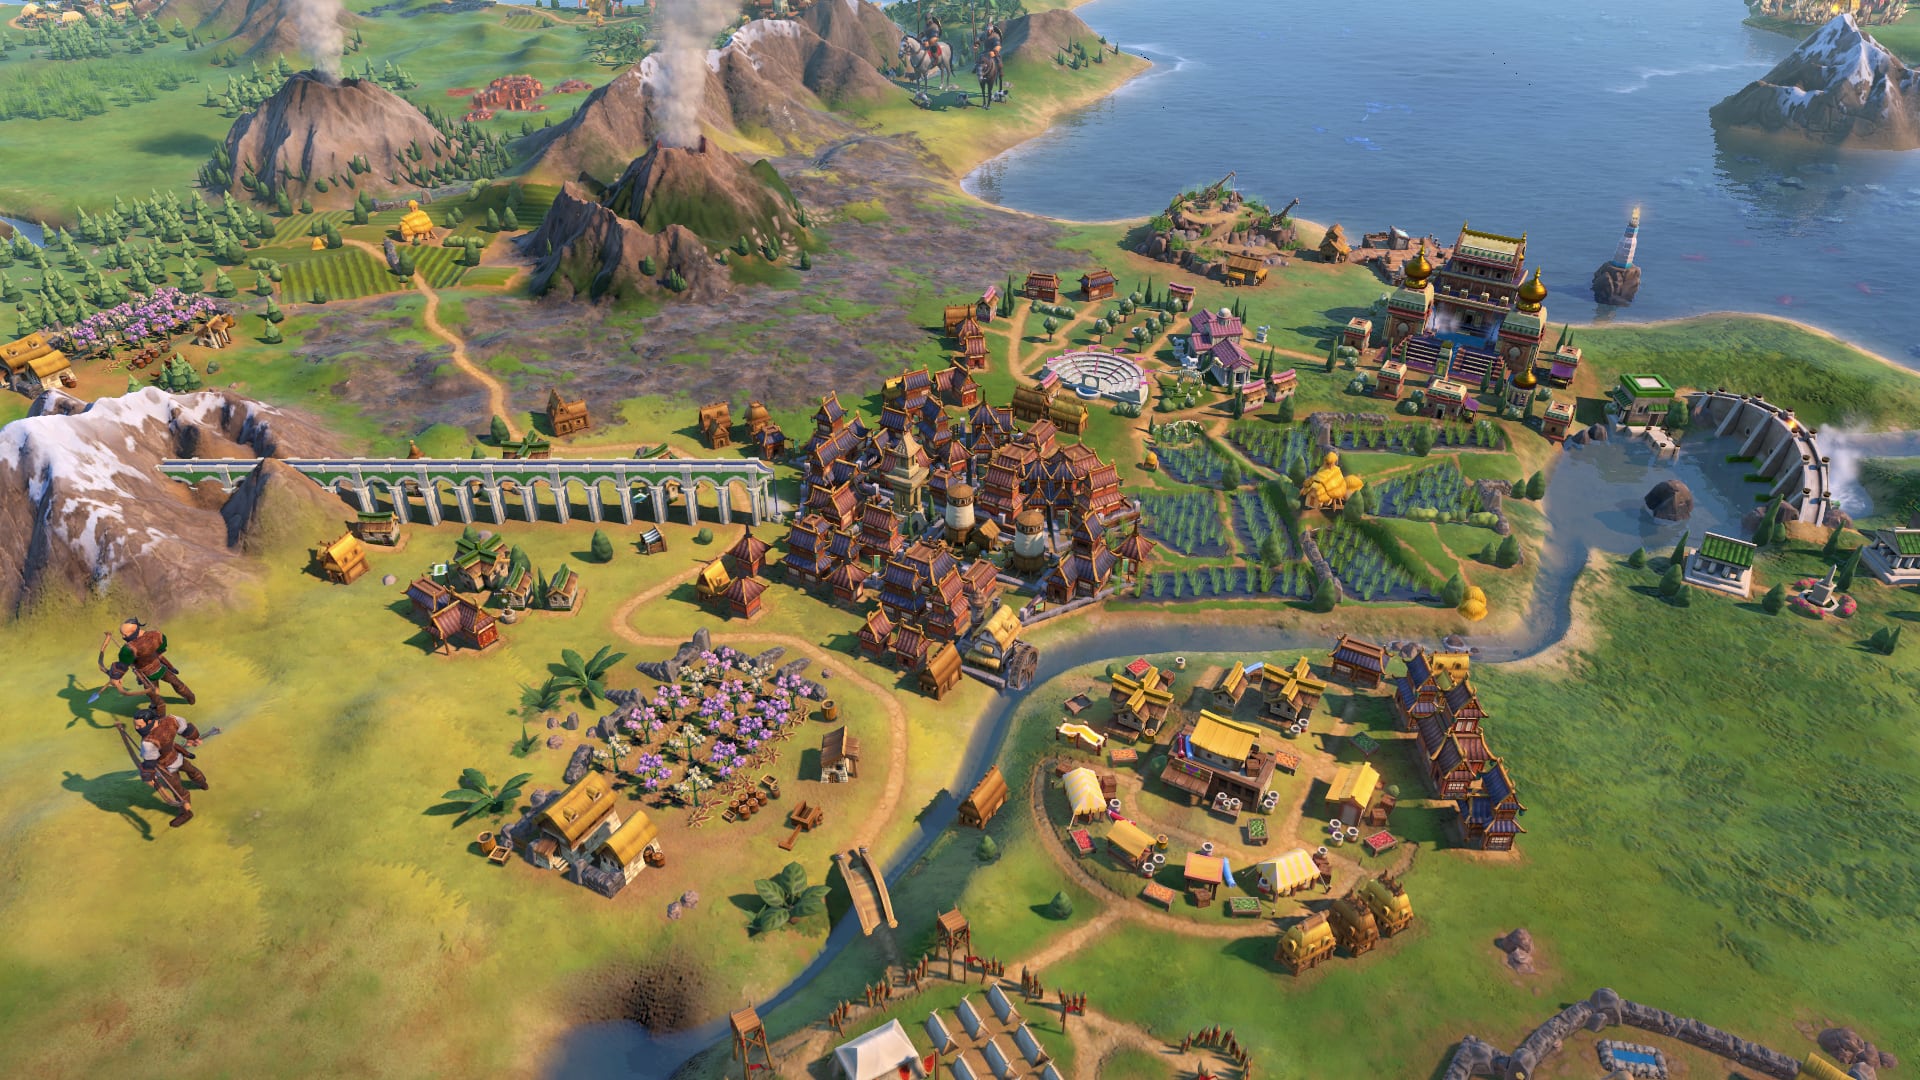 5 best ios games for strategy player - Civilization 6